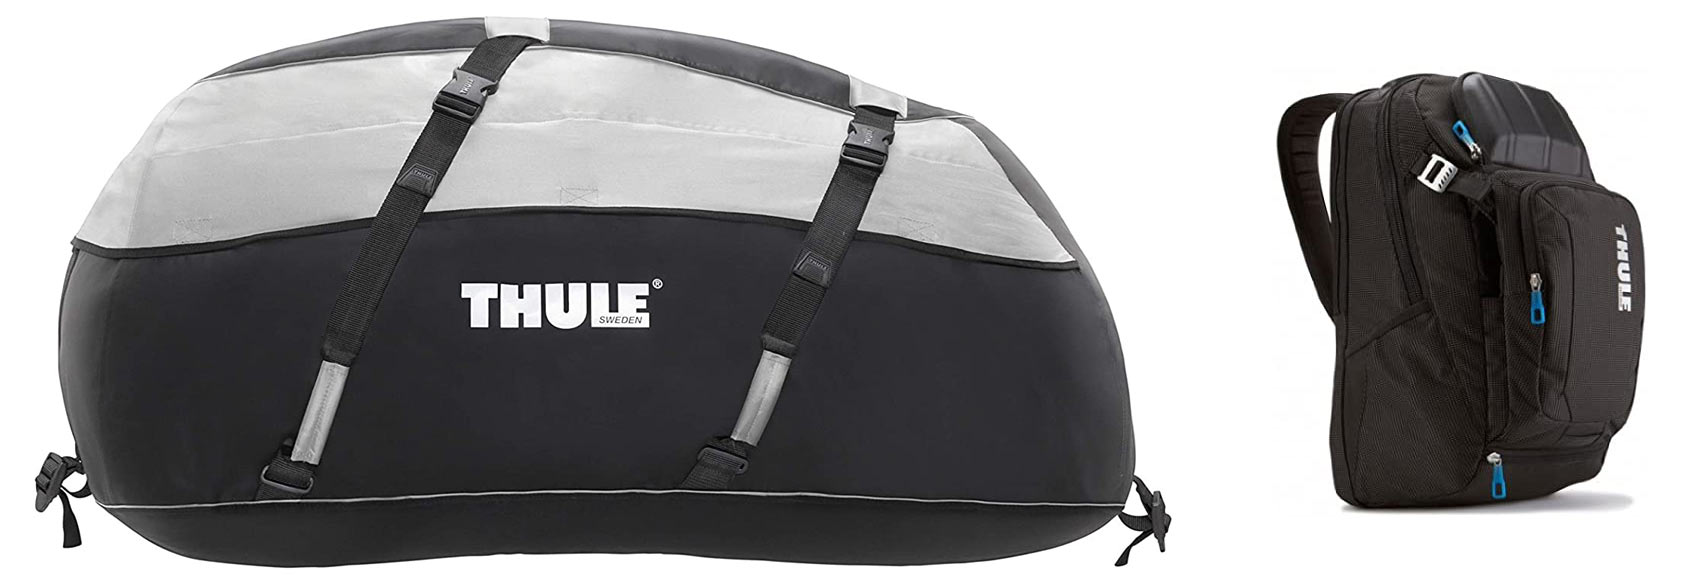 thule soft side rooftop cargo bag for vehicle roof racks on sale with amazon prime day 2020